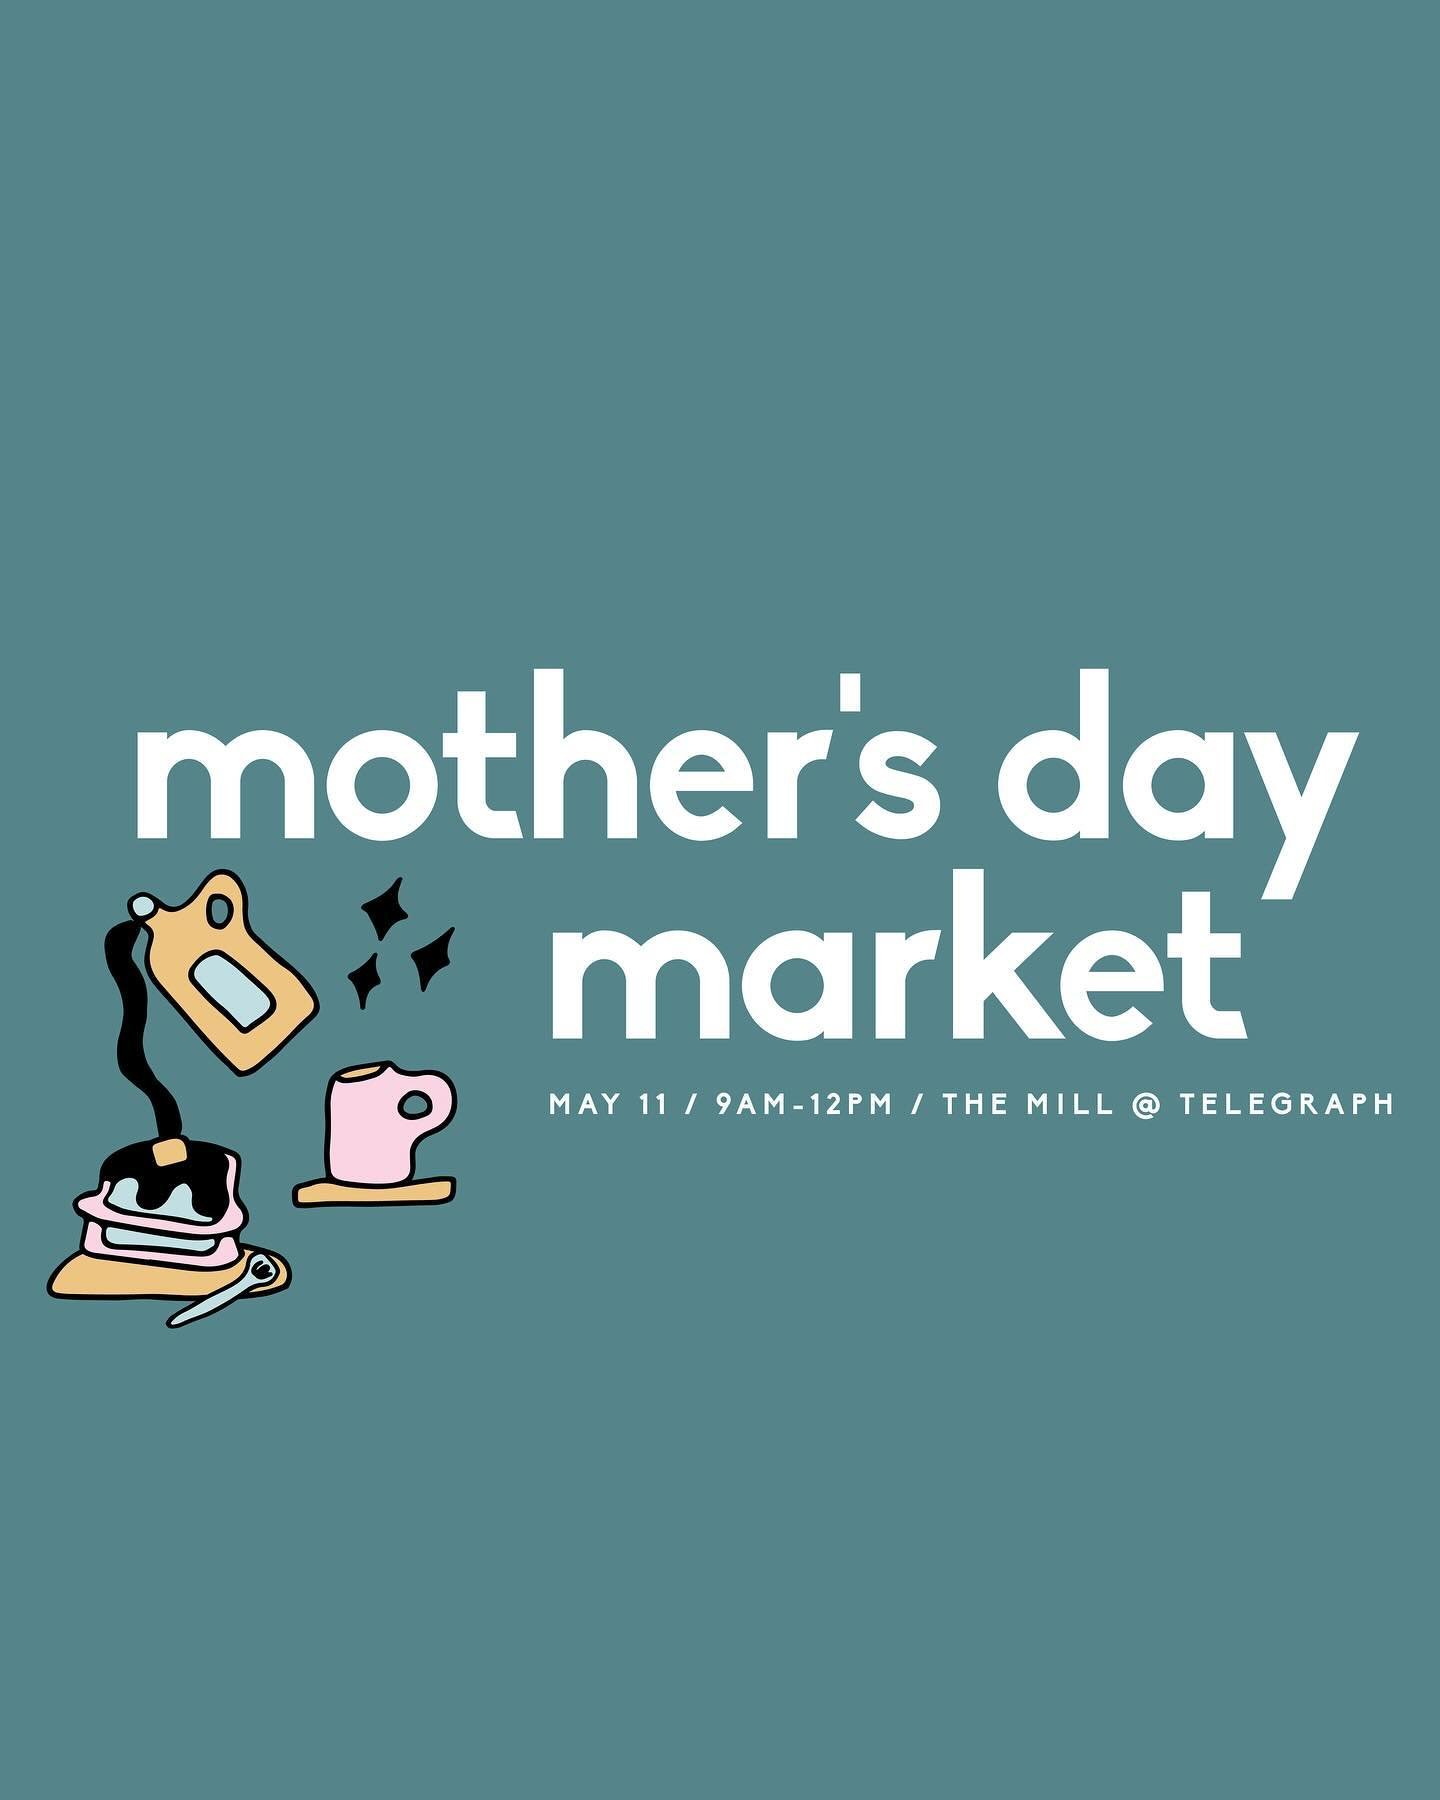 We couldn&rsquo;t resist telling you about a fun market happening THIS Saturday! 

Our friends at The Hope Venture @thehopeventure and The Mill are teaming up to bring you a special Mother&rsquo;s Day Market! We&rsquo;re talkin&rsquo; local vendors s